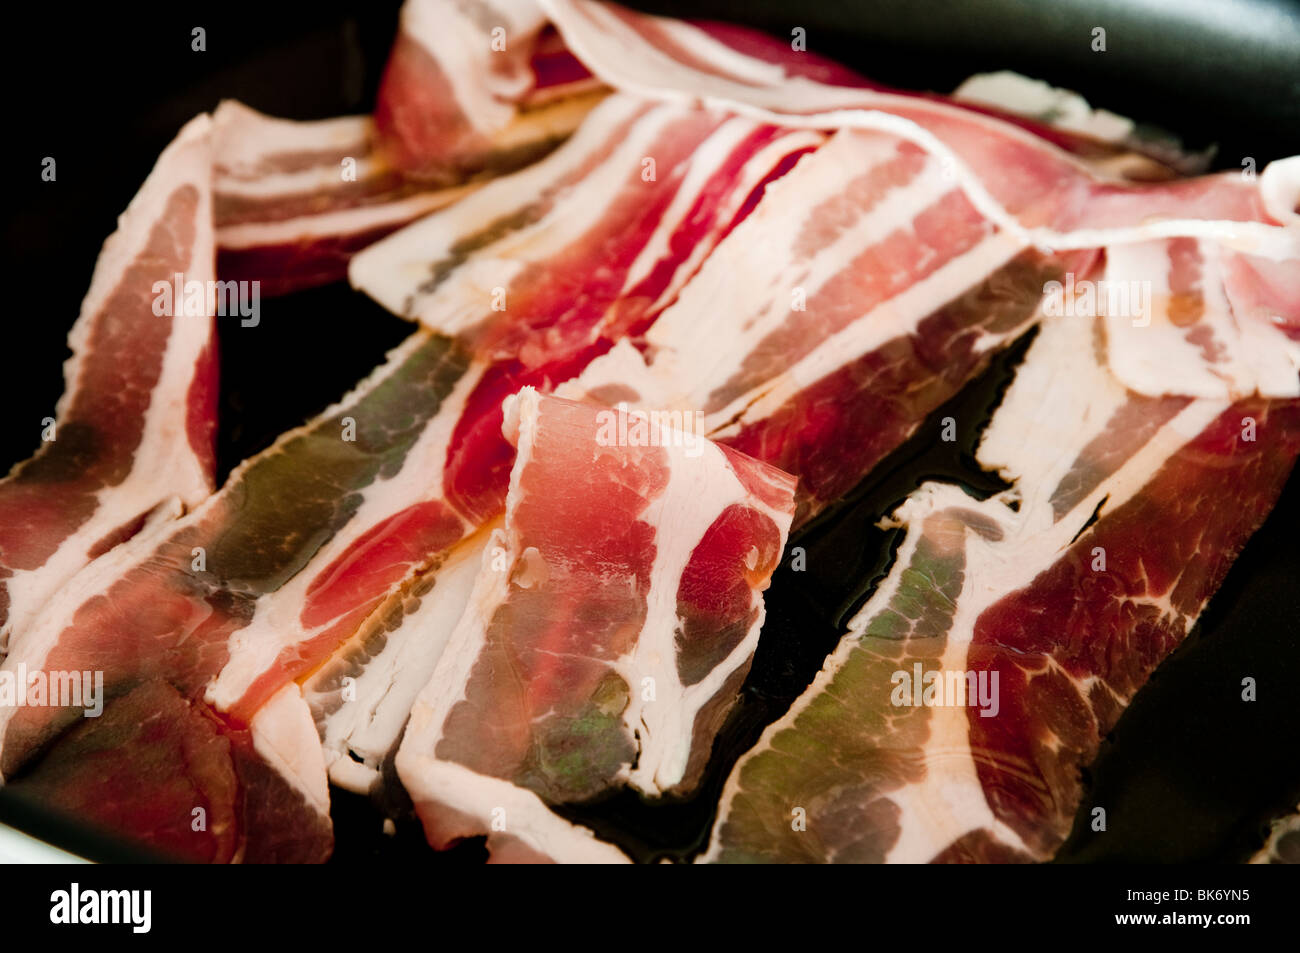 Rashers of bacon, raw and streaky bacon - being cooked / fried in a frying pan. Close up view. Stock Photo